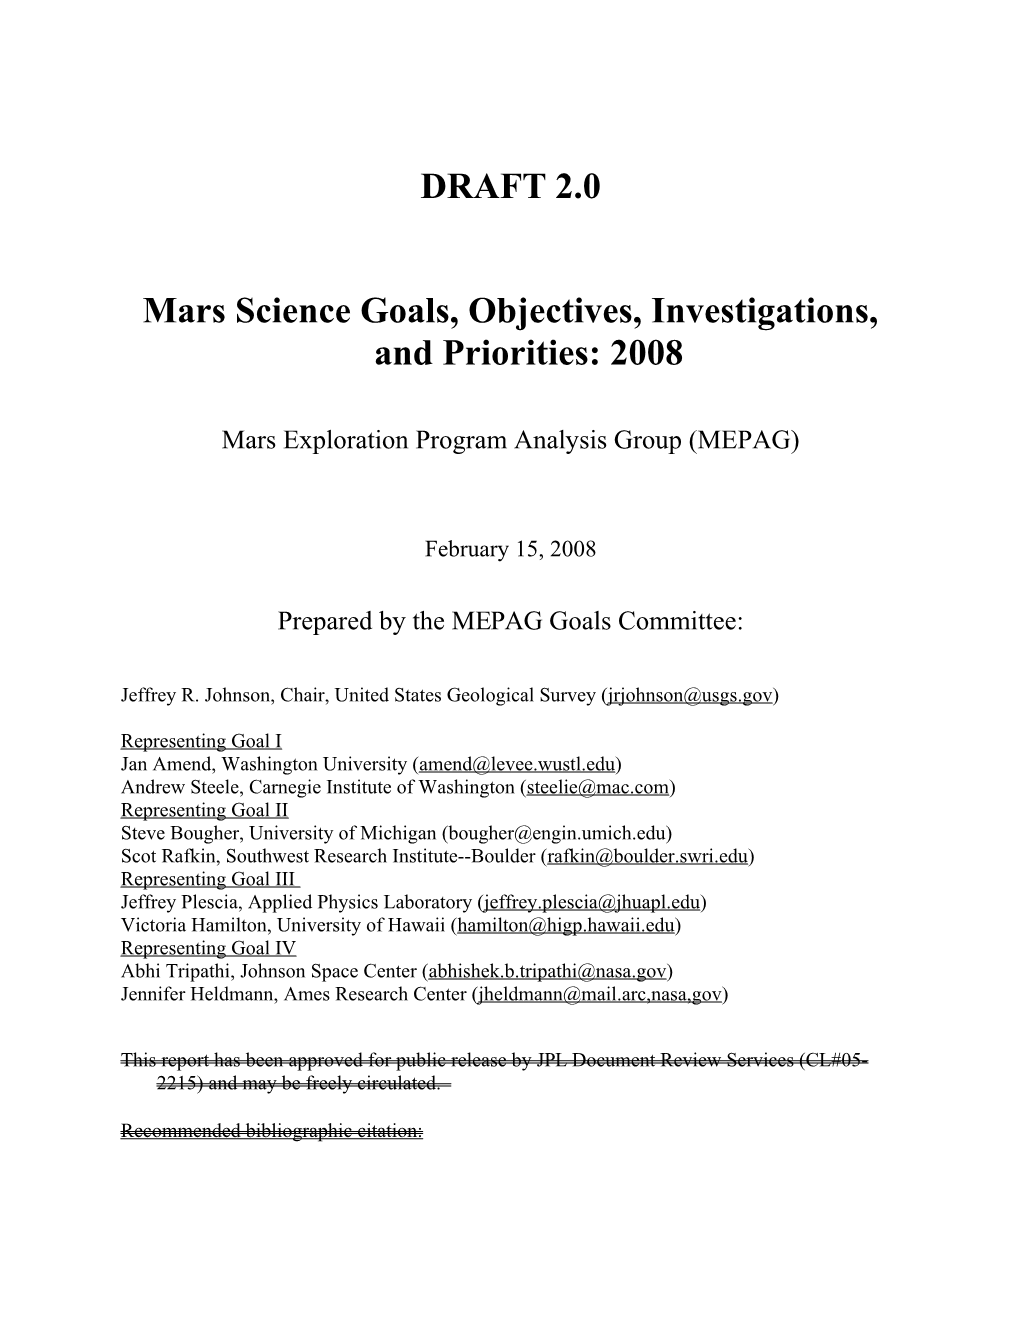 MEPAG Science Goals, Objectives, Investigations, and Priorities: 2008 DRAFT 1.6